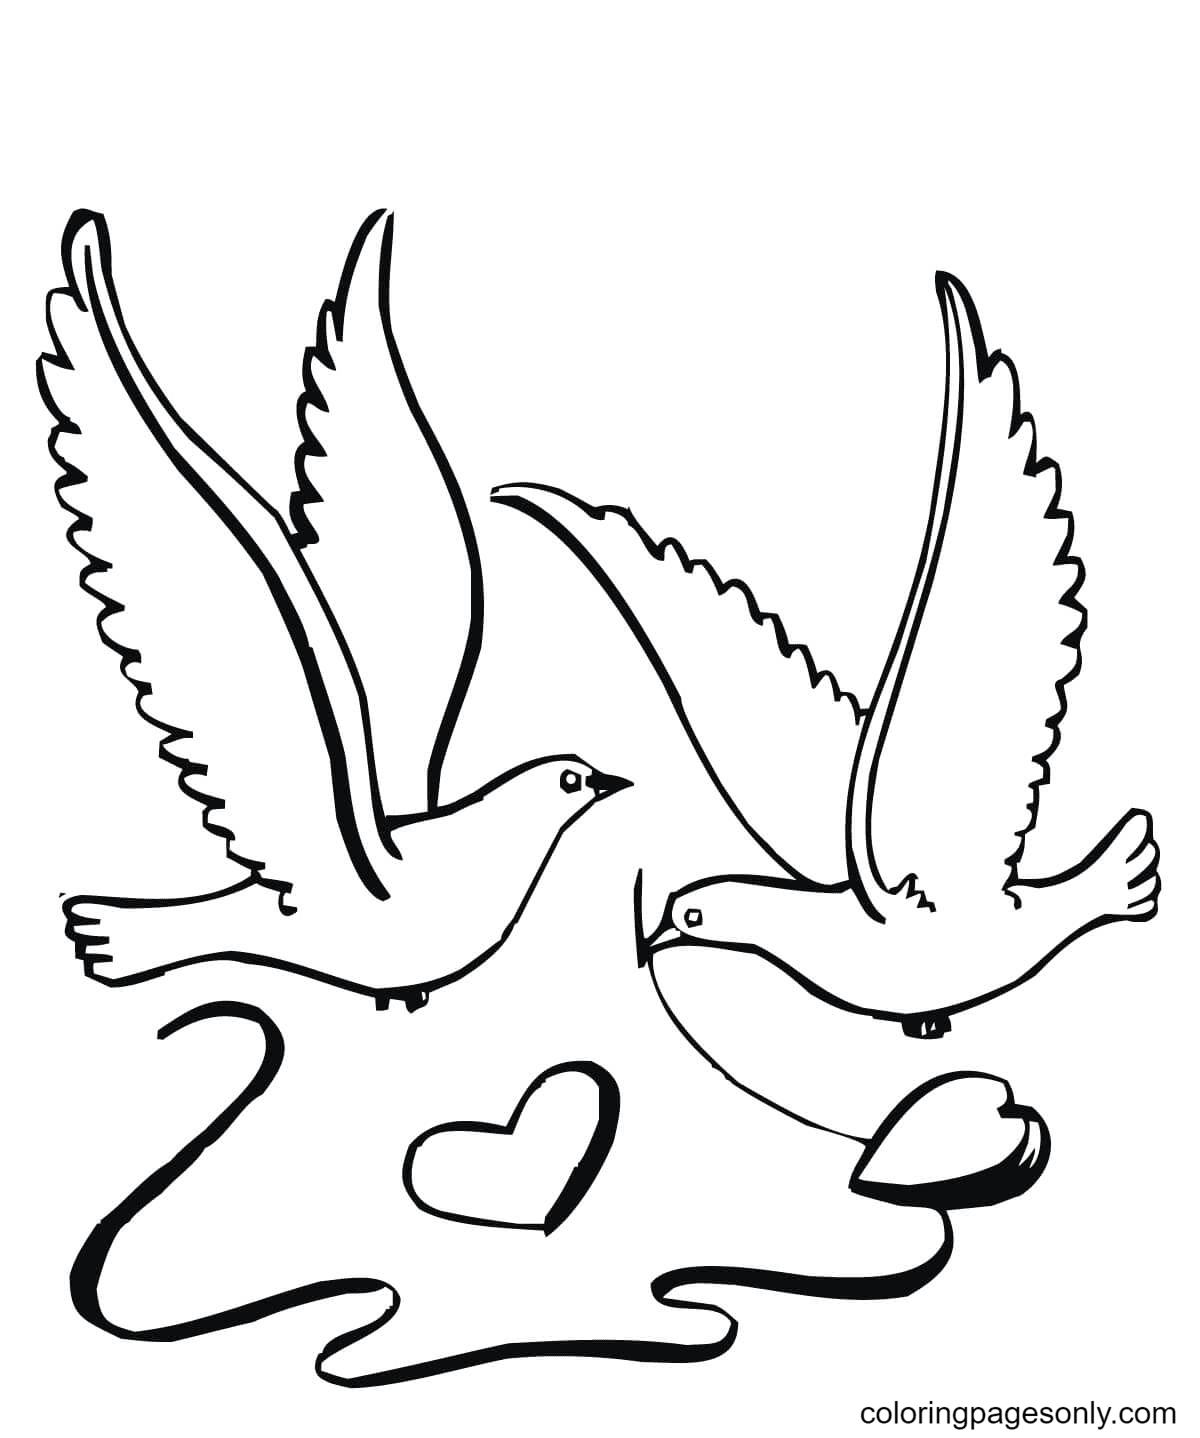 Heart Coloring Pages Printable for Free Download